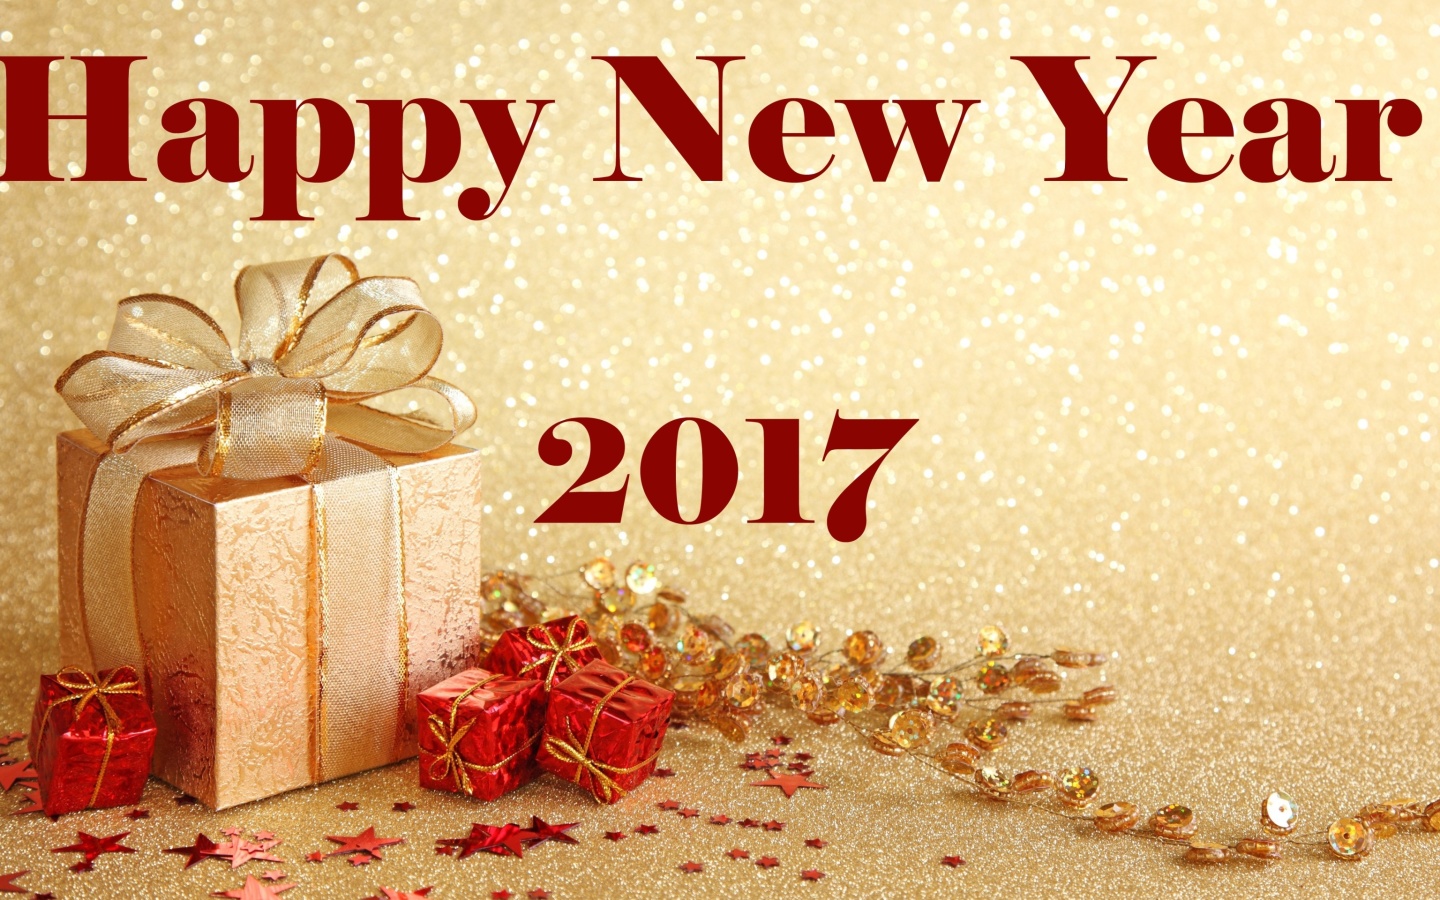 Happy New Year 2017 with Gifts screenshot #1 1440x900